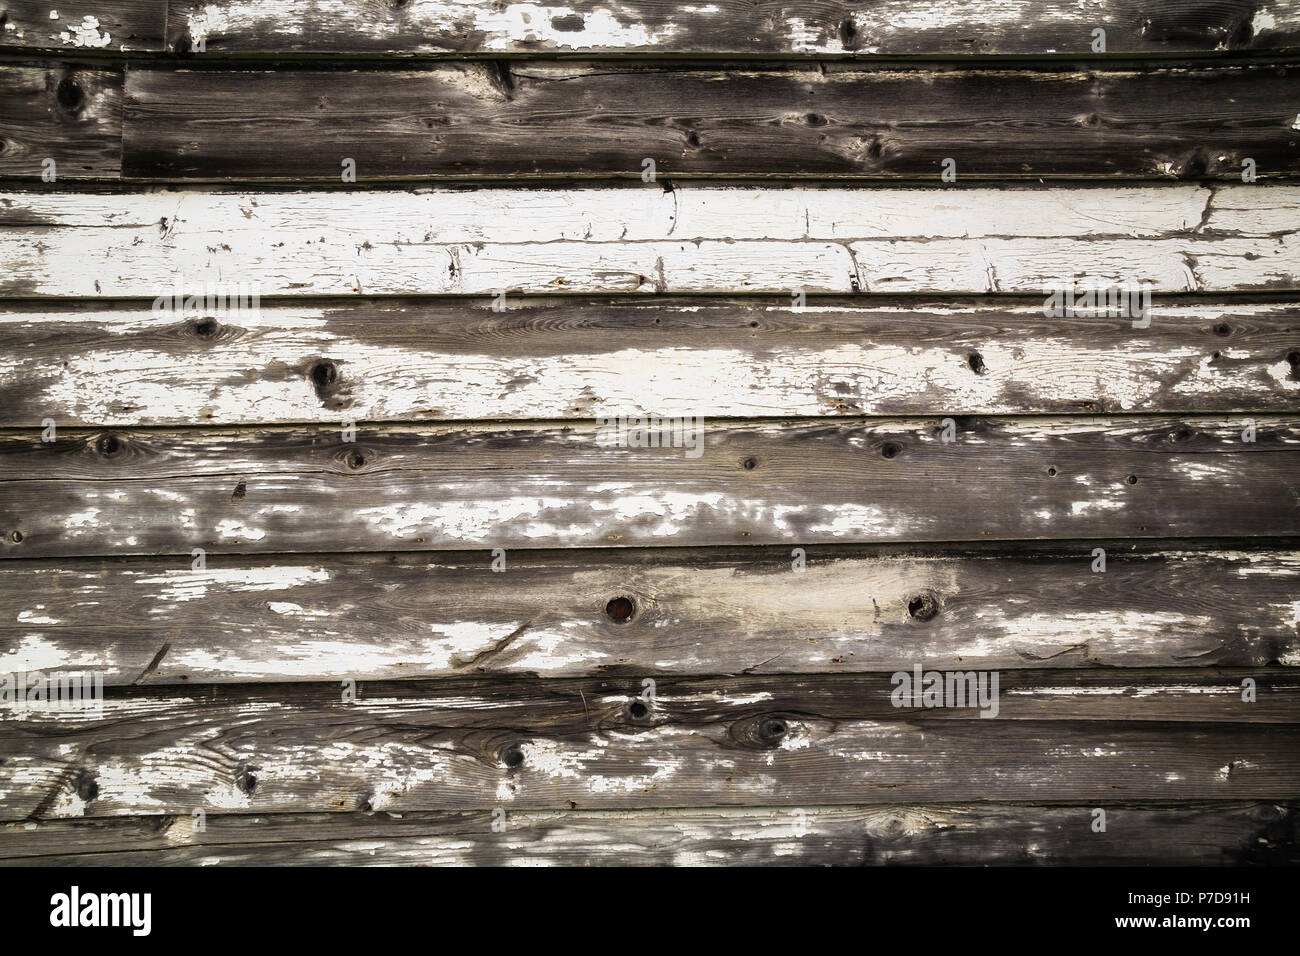 Close-up of old wooden grey and white painted barn wood planks, Quebec, Canada Stock Photo